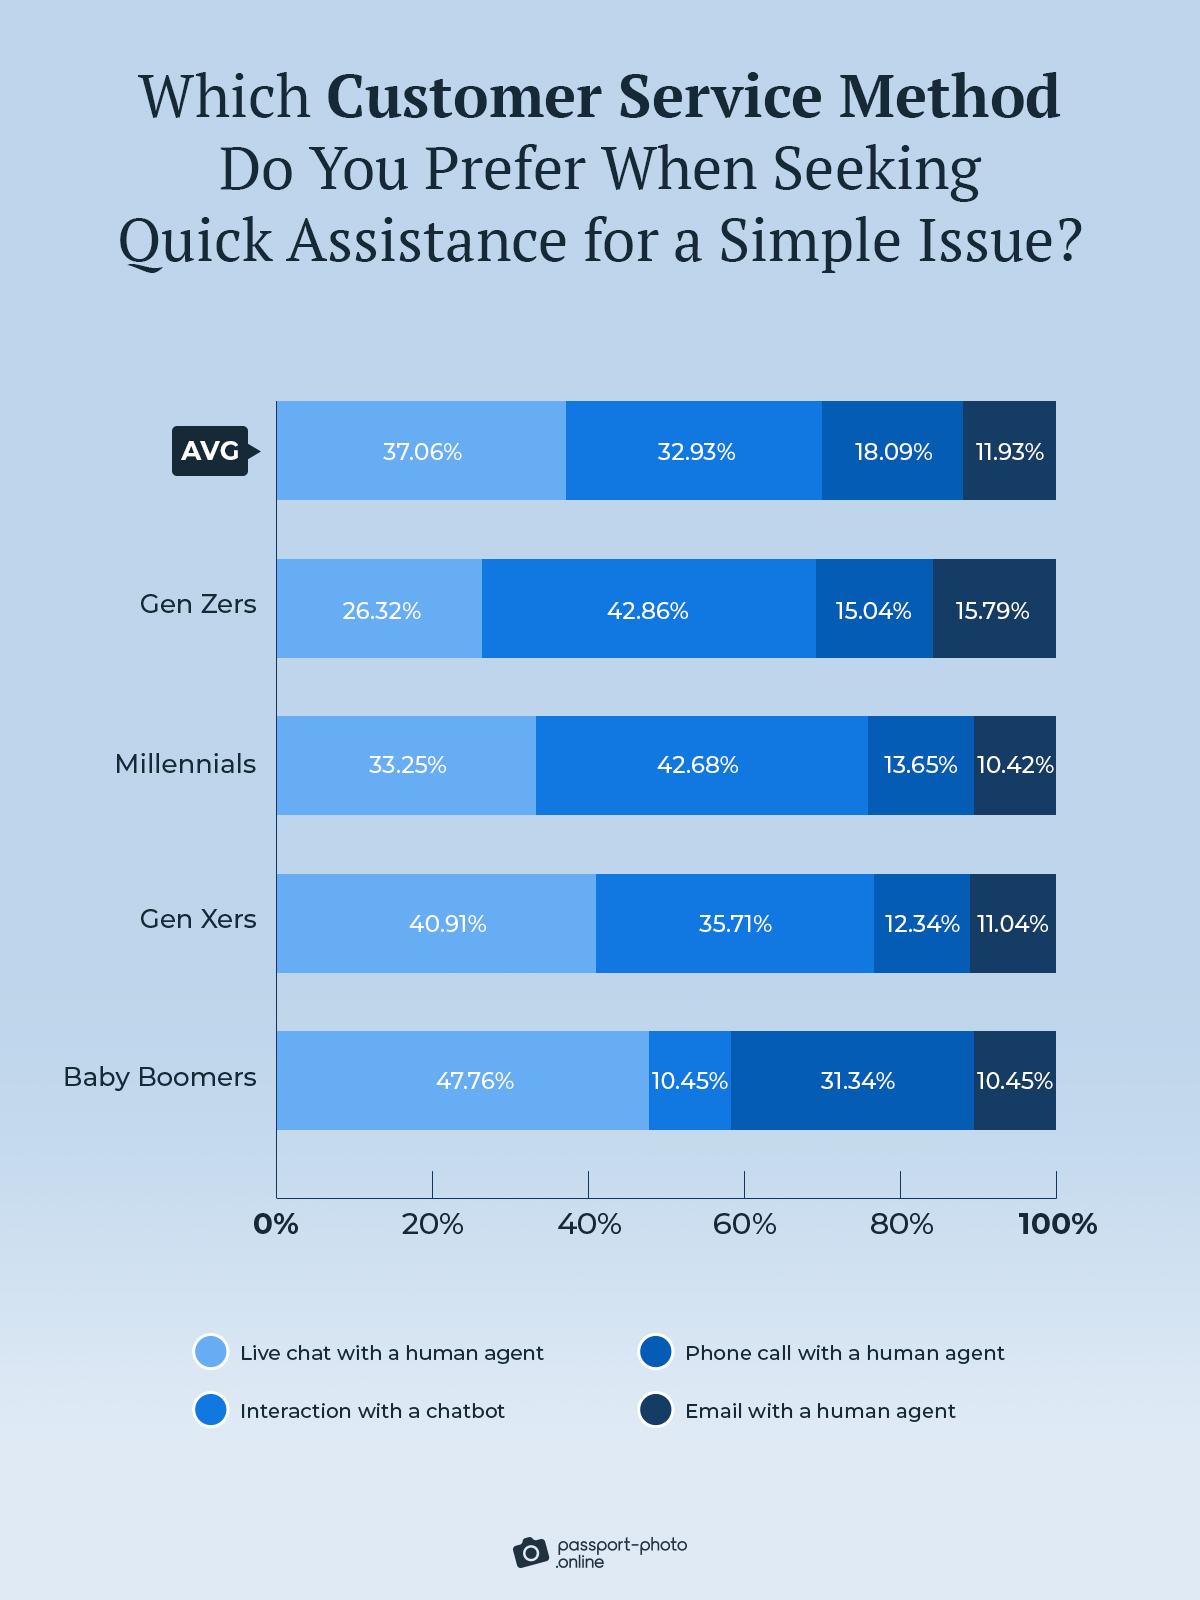 Which customer service method do you prefer when seeking quick assistance for a simple issue?